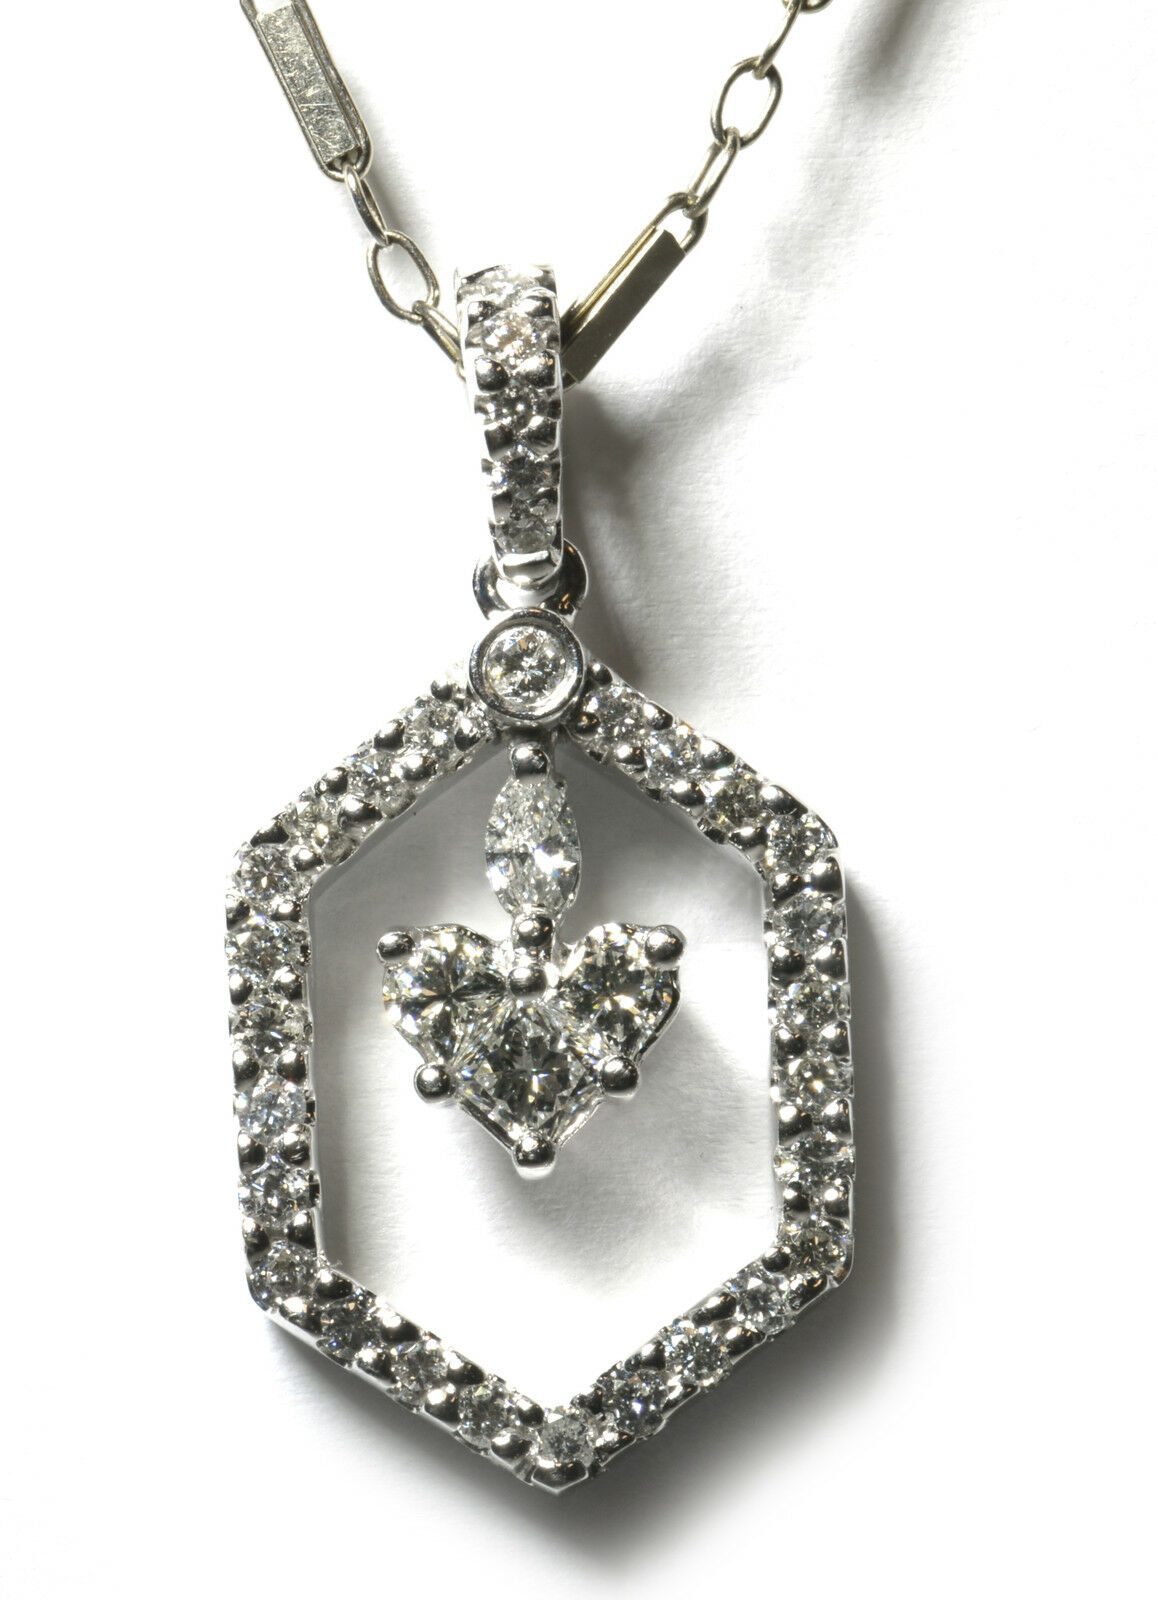 Diamond Surrounded Dangling Heart Pendant Necklace in 18k White Gold